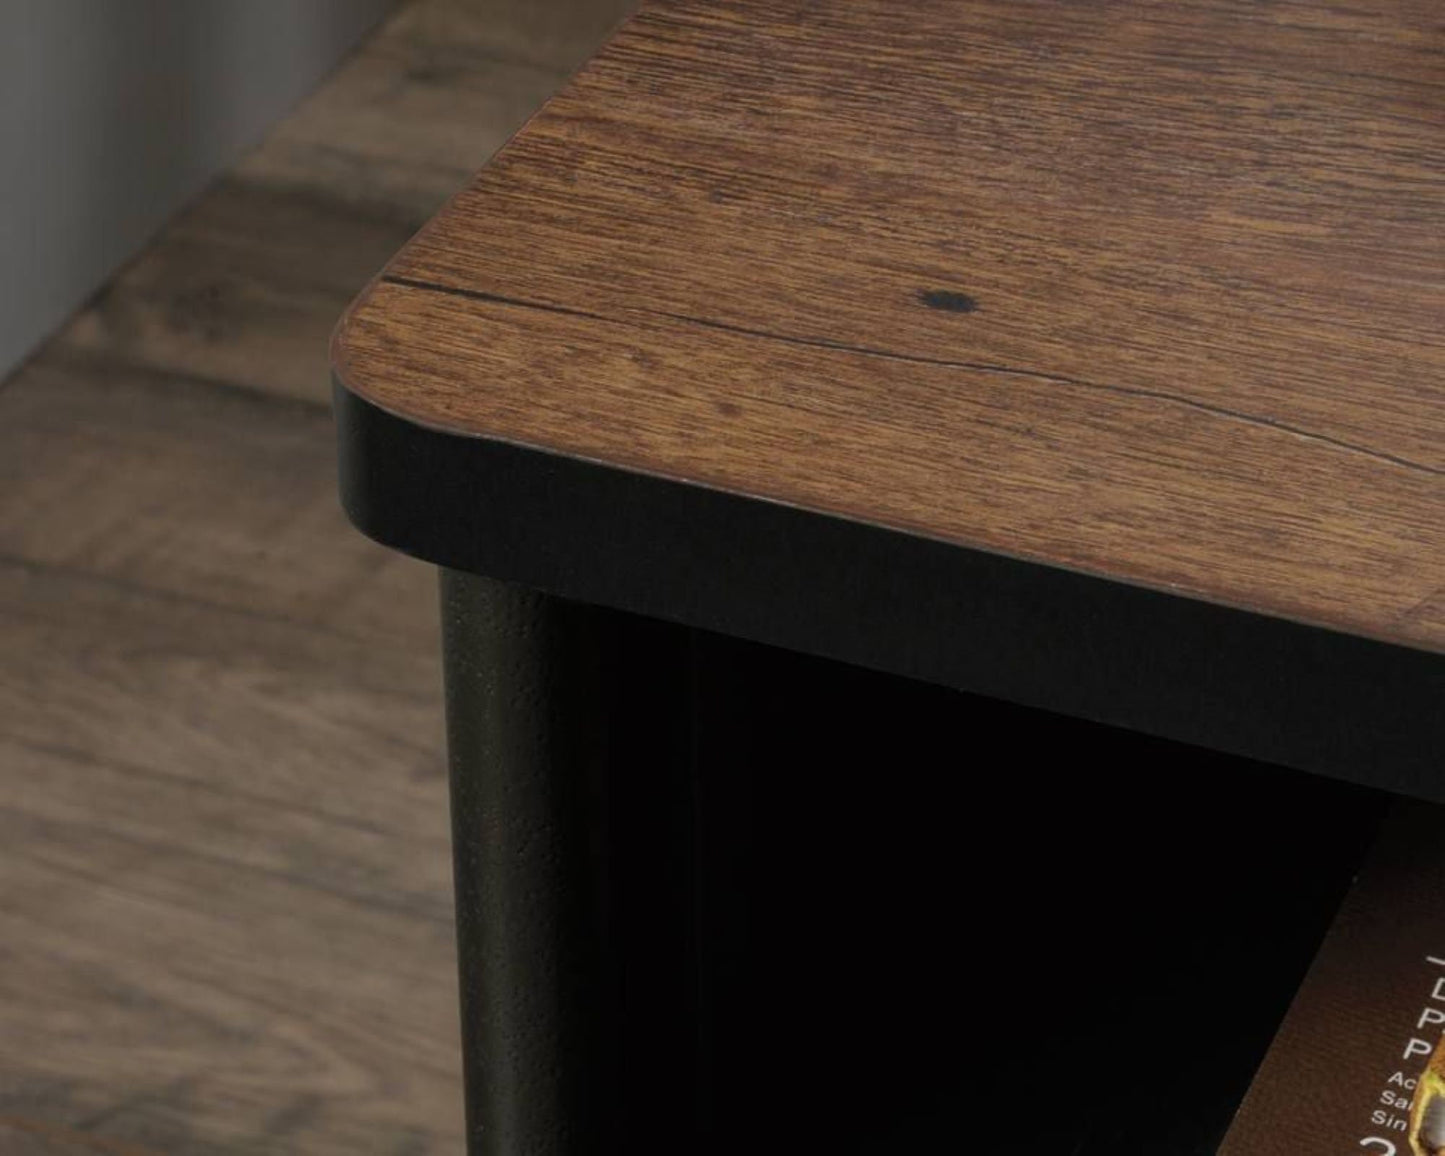 Industrial Style Loft apartment style desk in a black finish with Oak accent